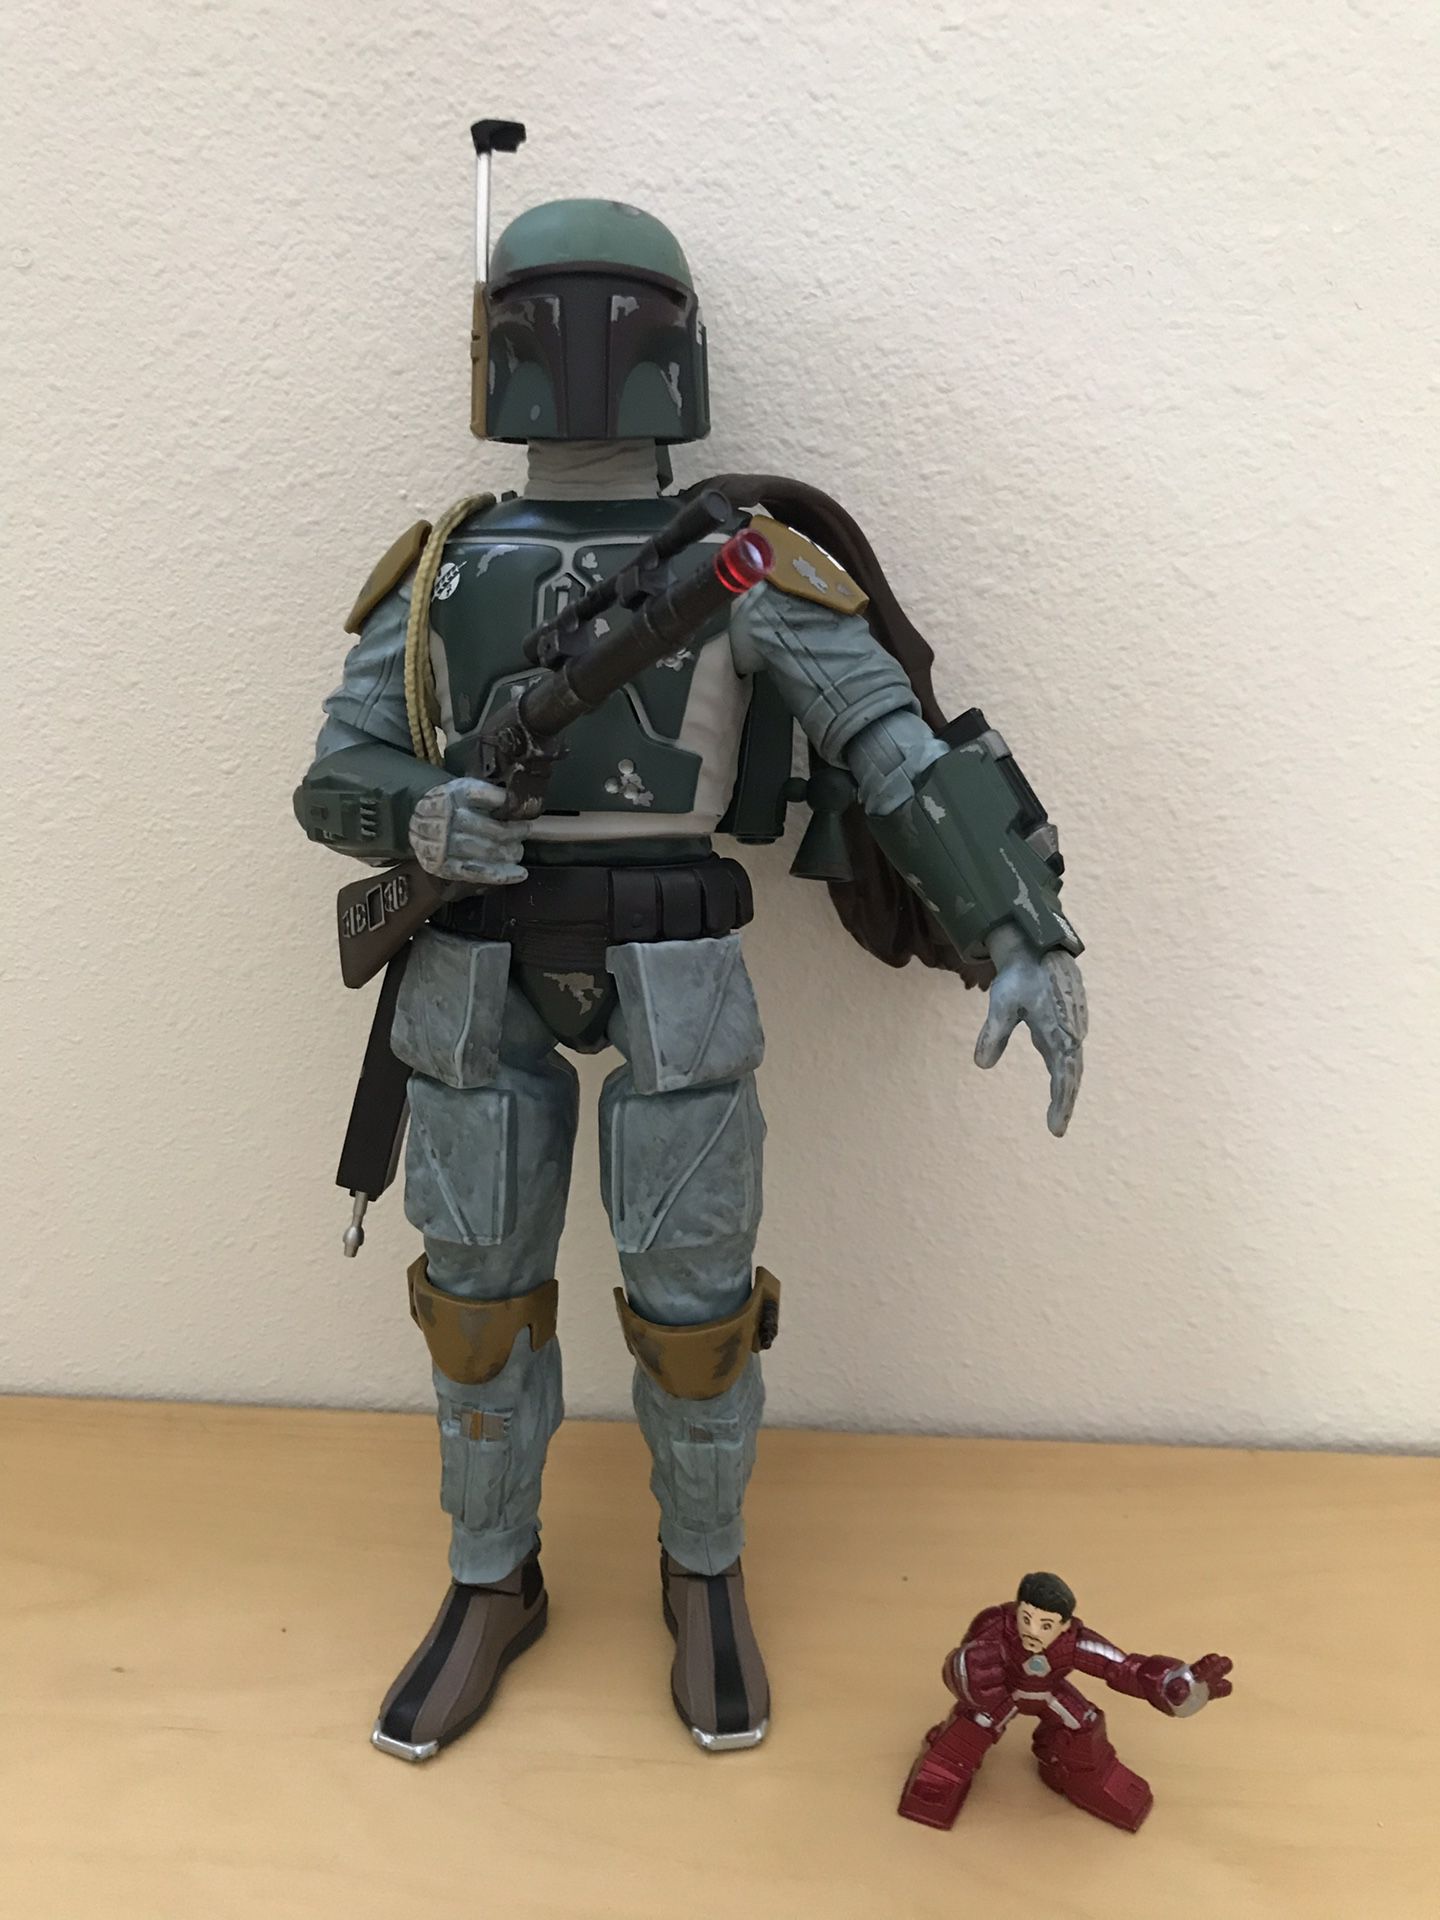 Darth Vadar and Boba Fett figures. A must have for any Star Wars collectors!